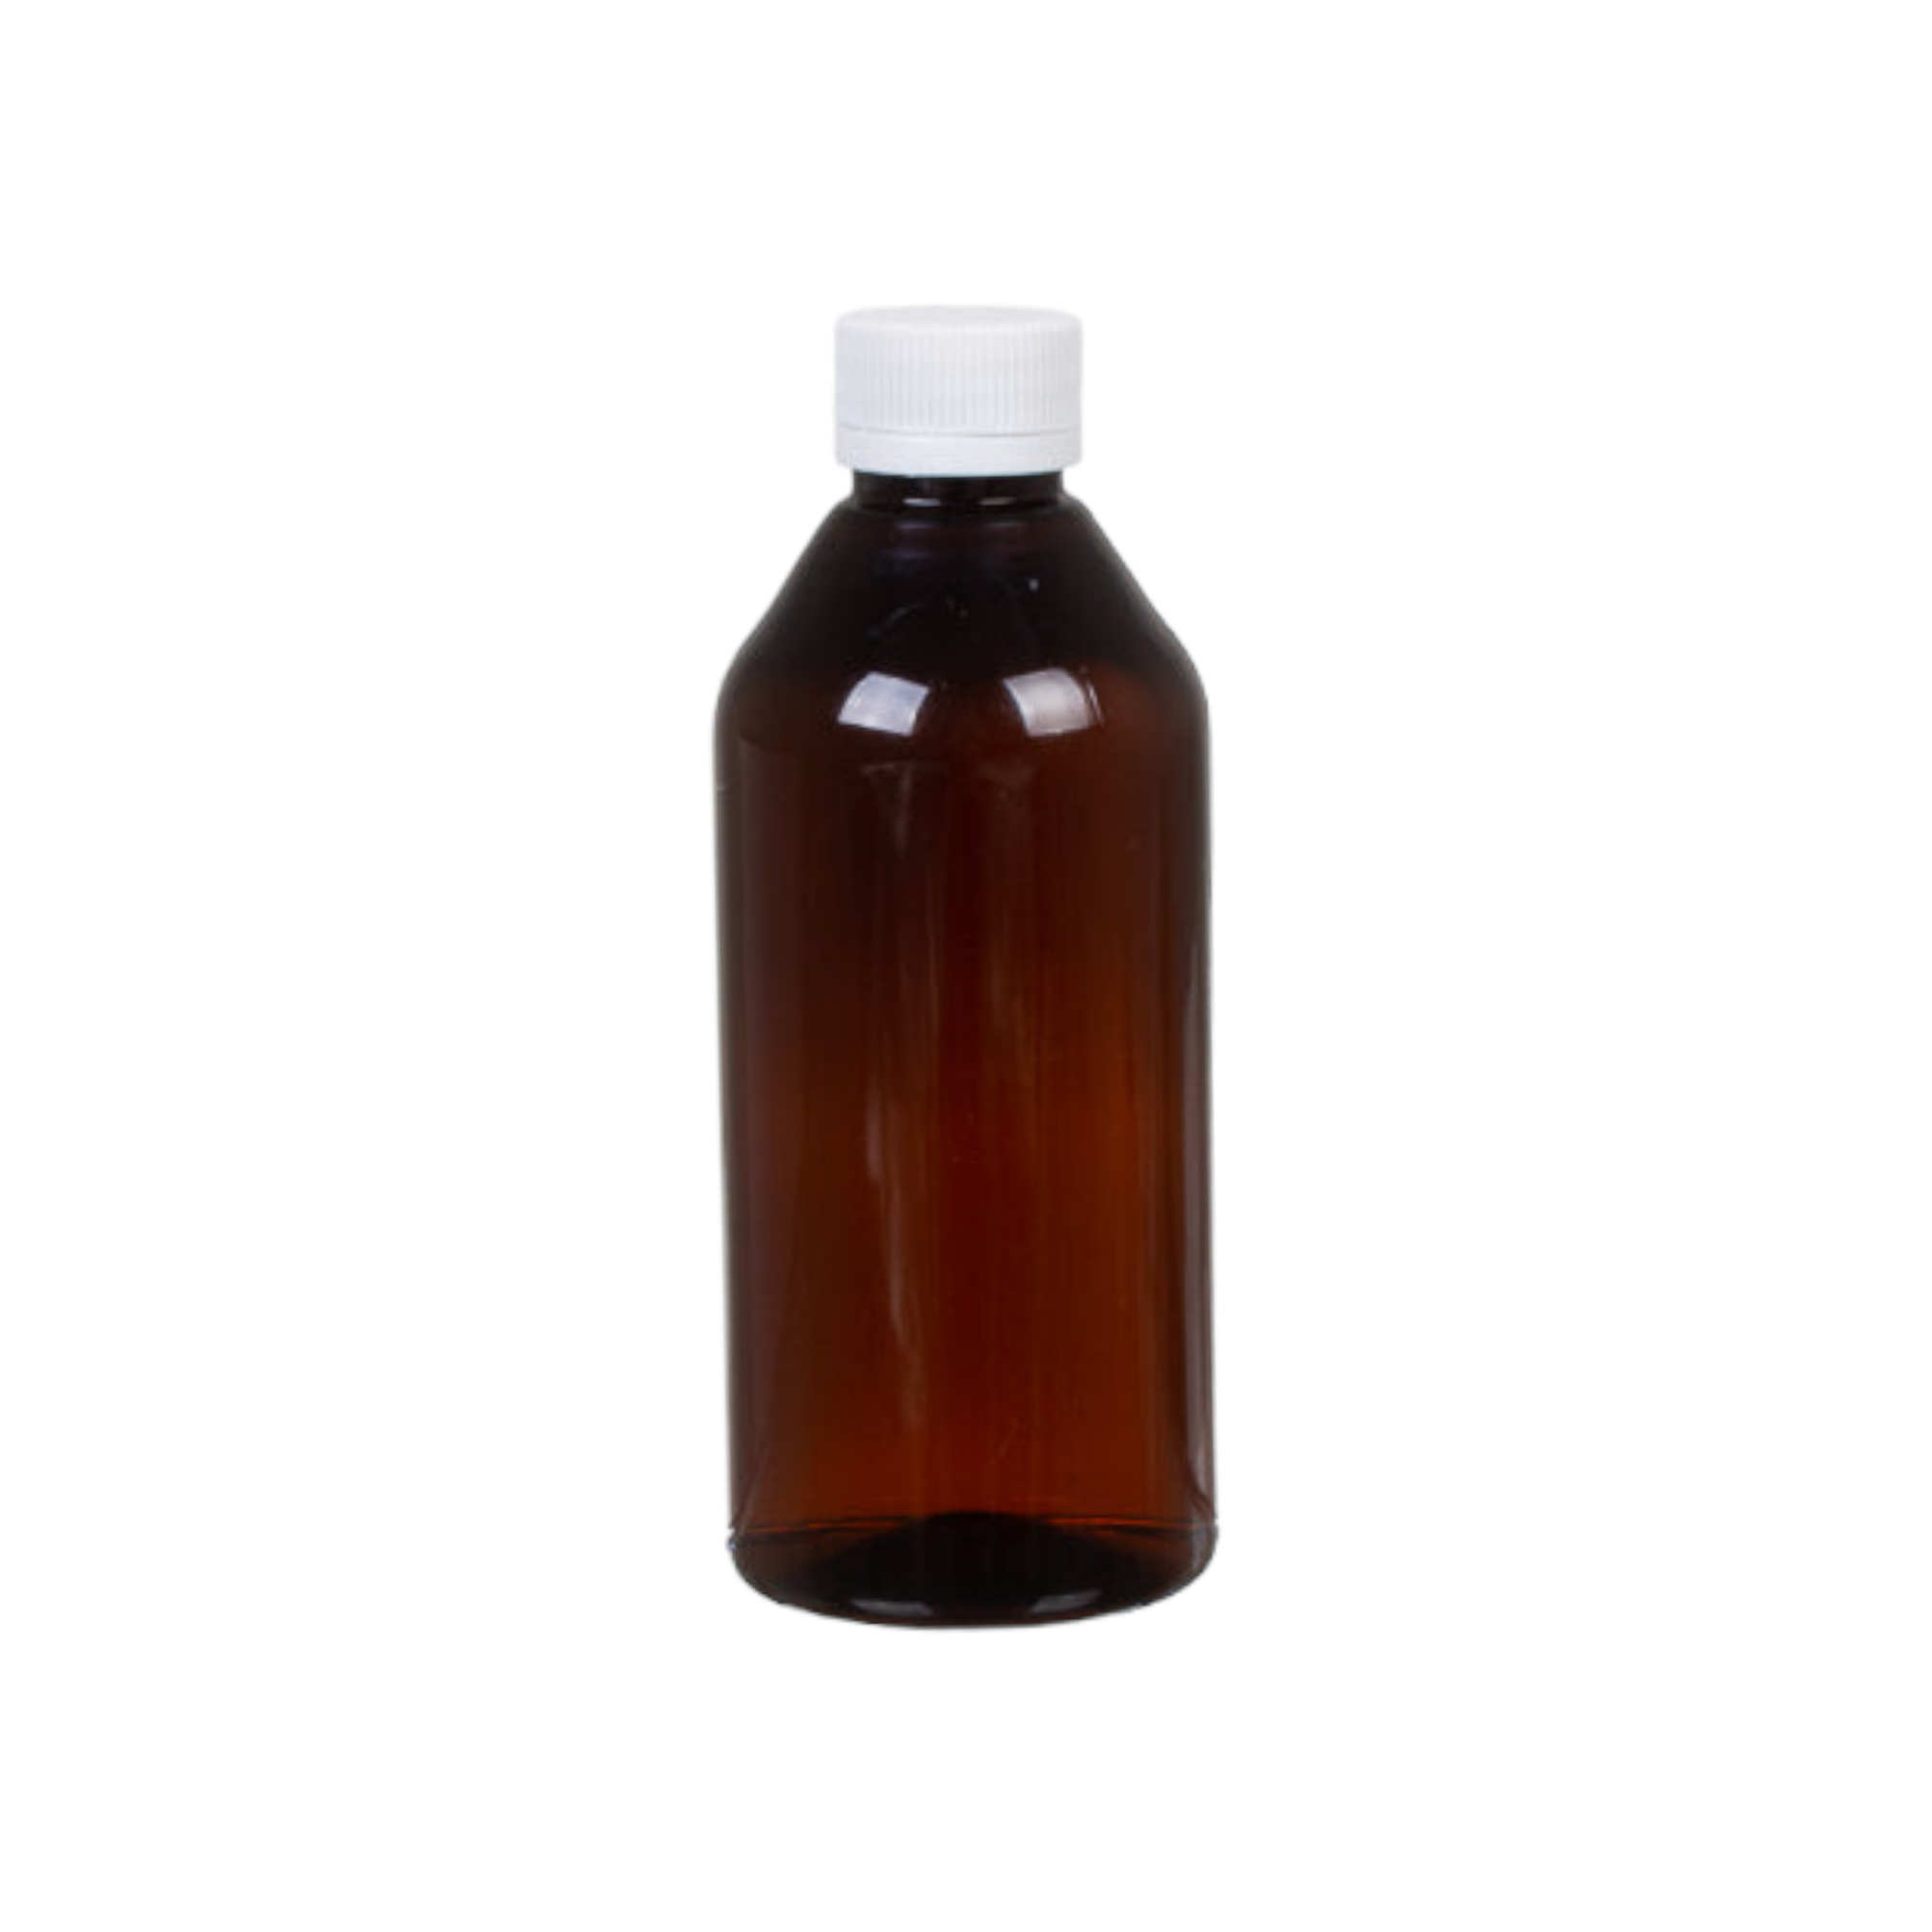 200ml Amber PVC Bottle Round Brown with 28mm White Screw Cap